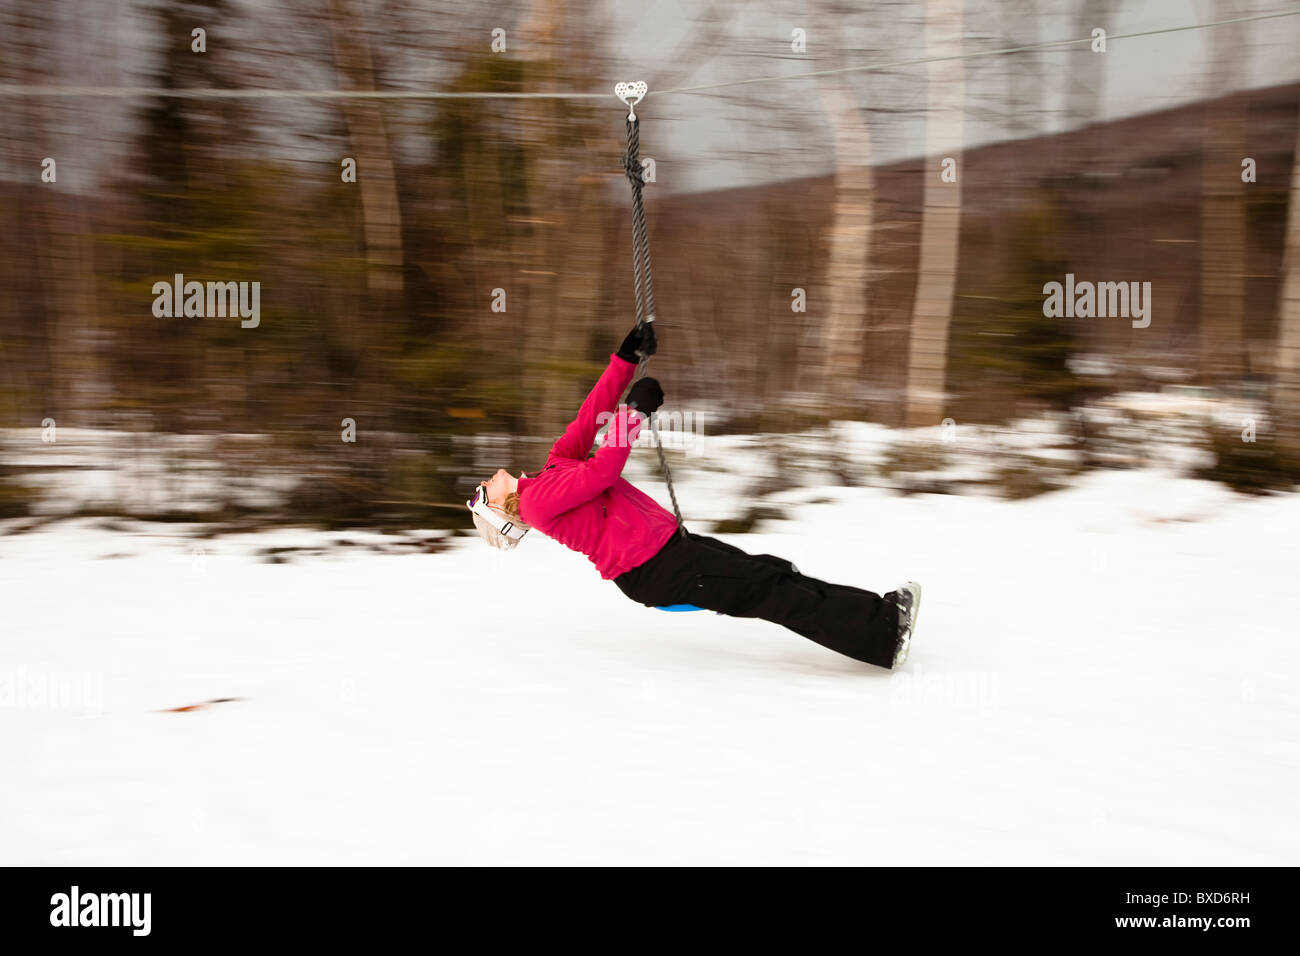 A woman plays on a zip line in Bretton Woods, New Hampshire. Blurred motion. Stock Photo